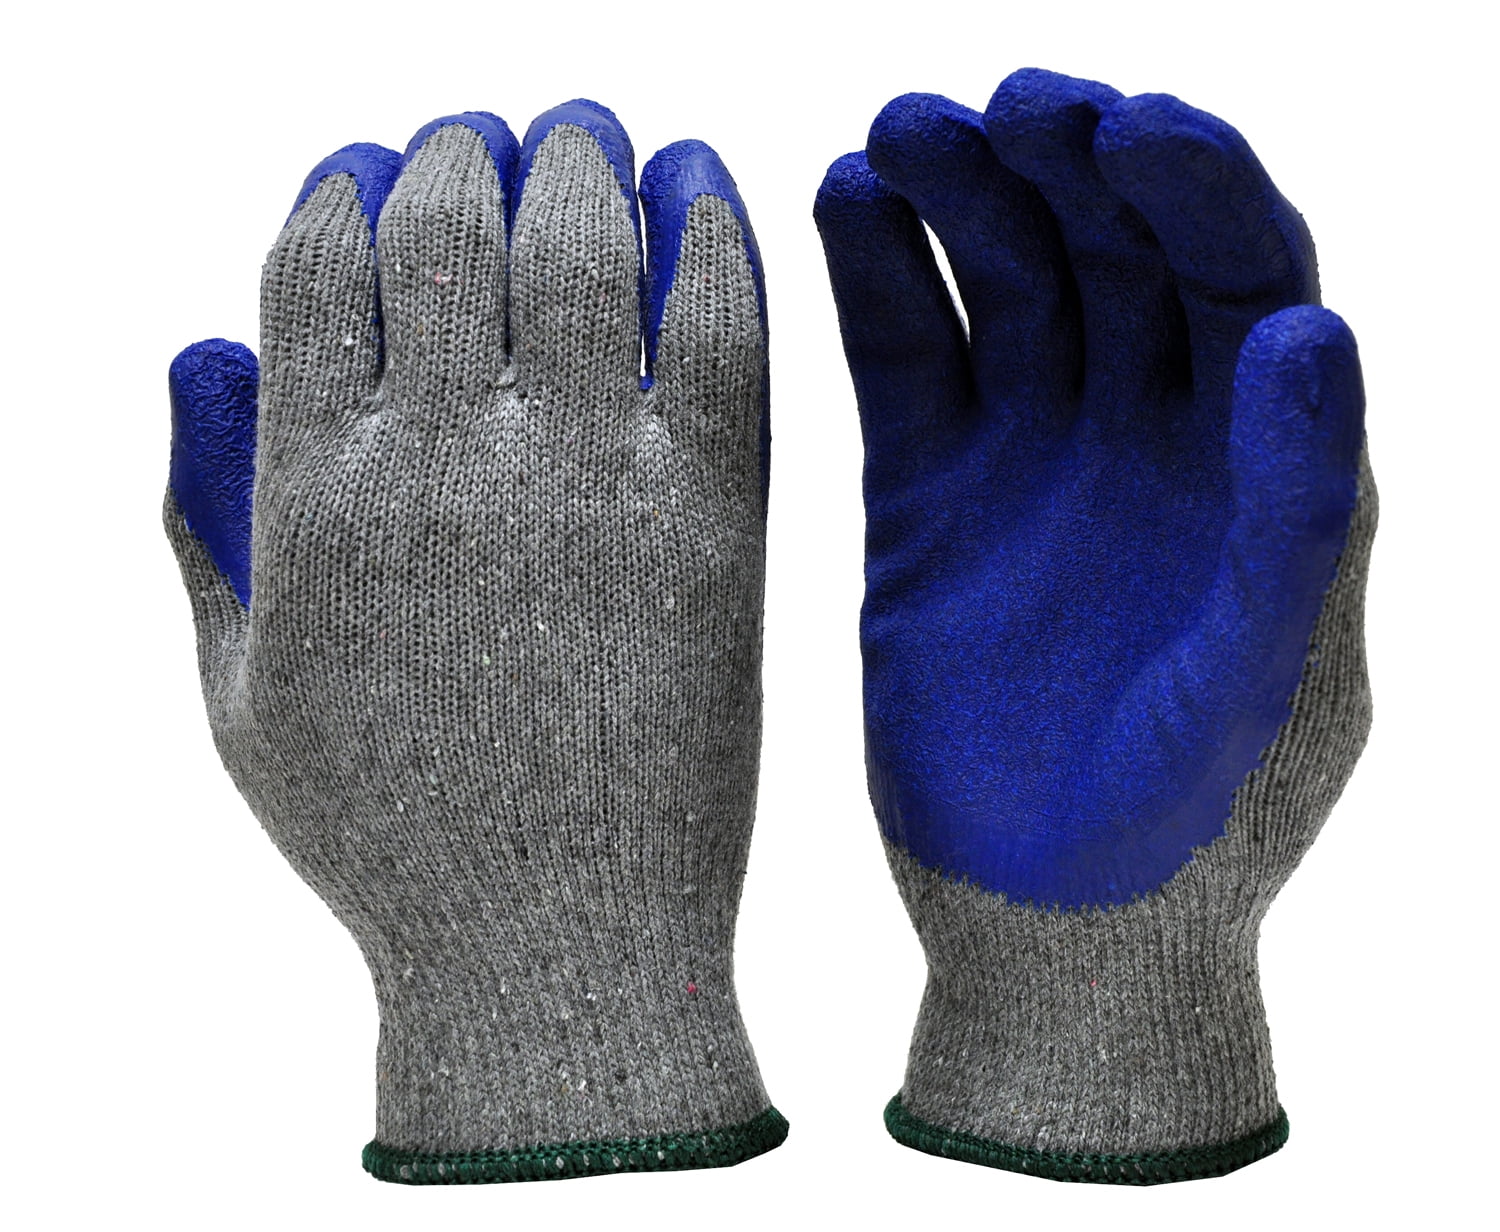 Infimor Work Gloves for Men 12 Pairs X-Large, Rubber Latex Texture